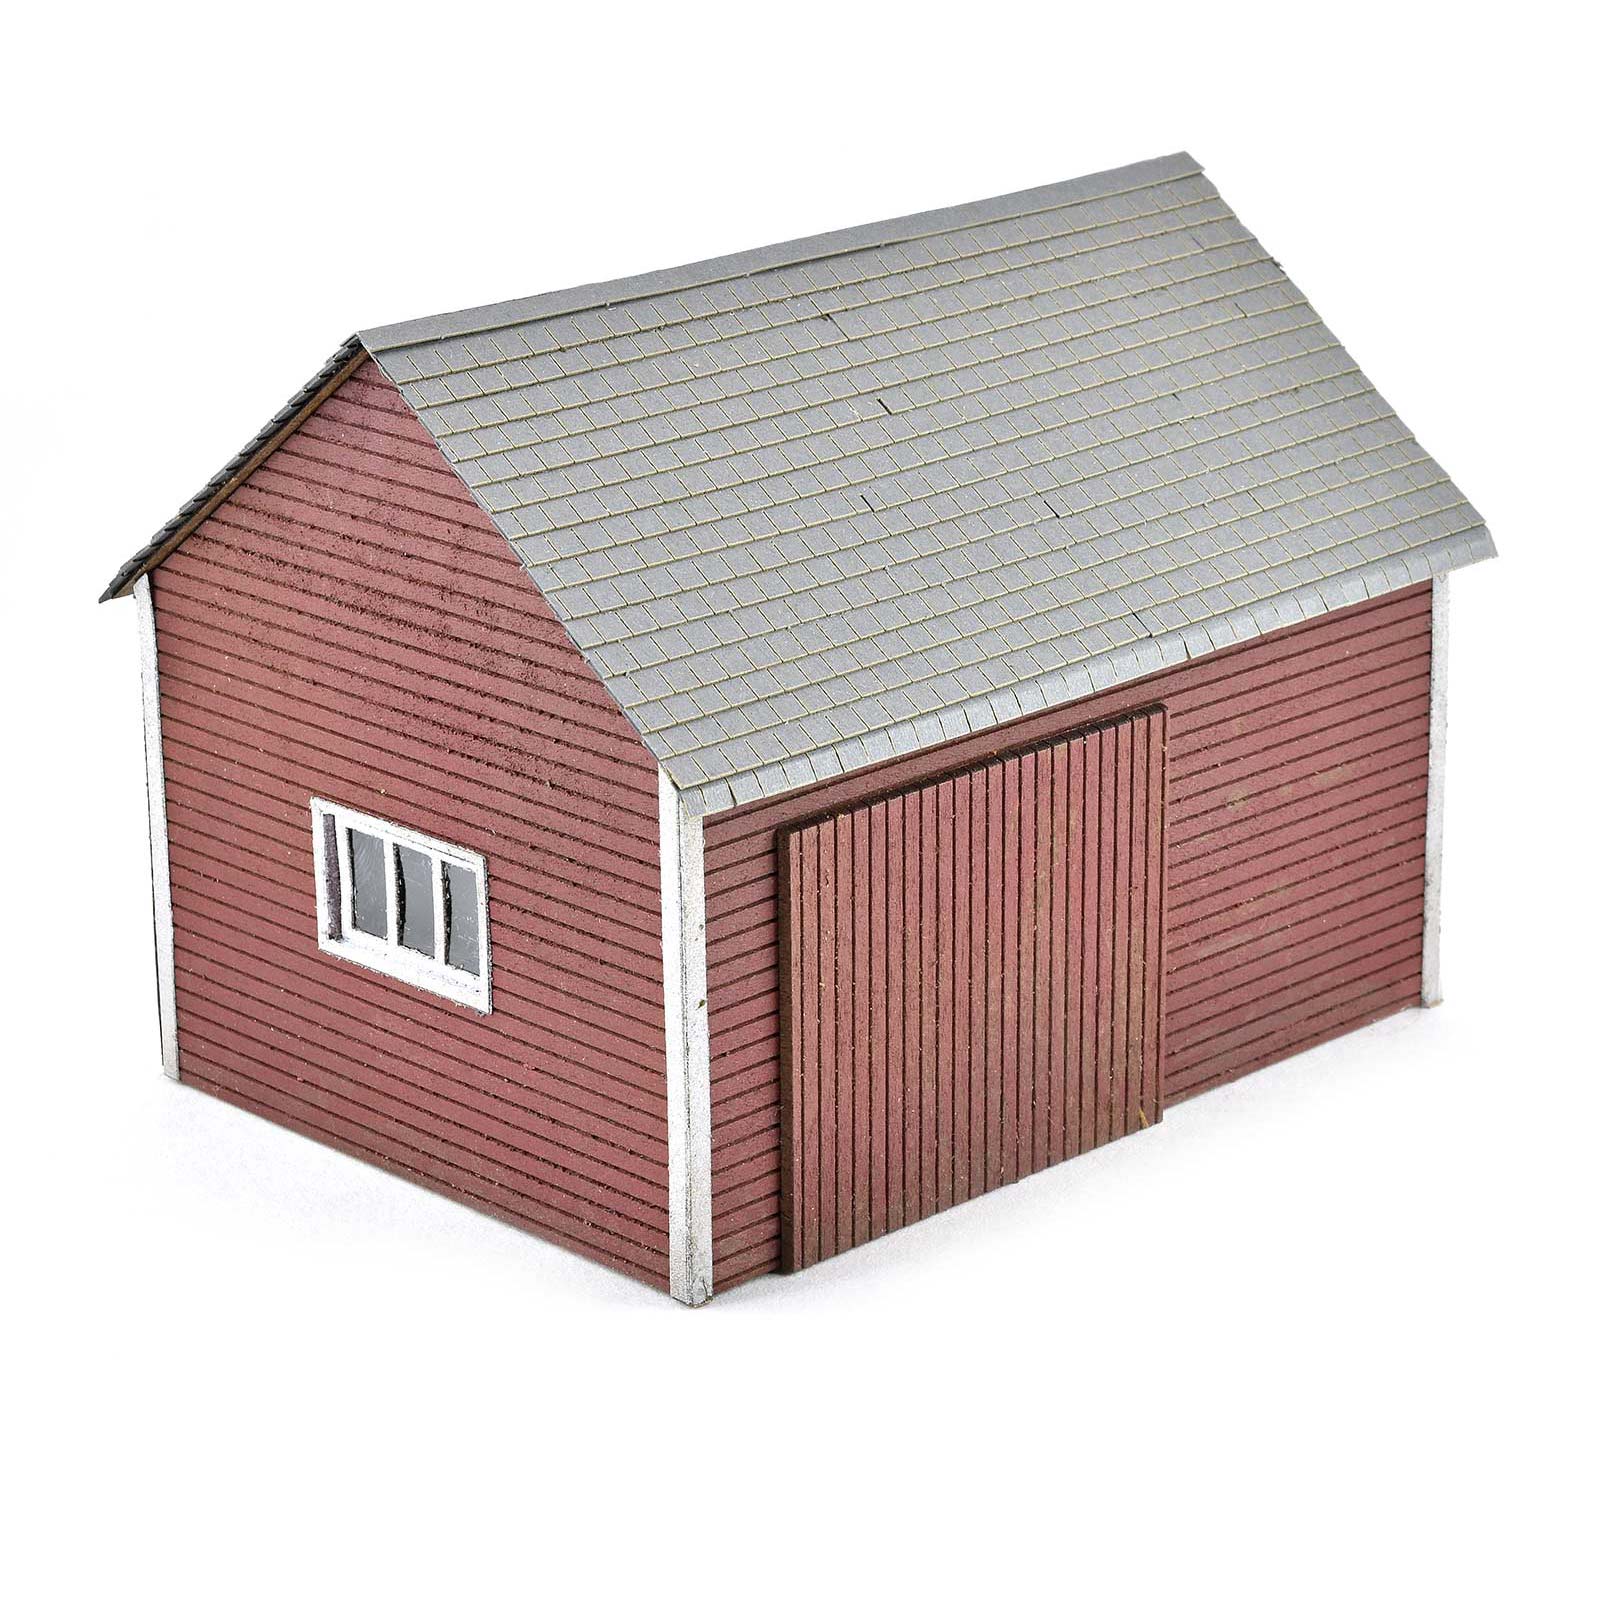 Rural Workshop Tool Shed Kit, O Scale, By Scientific